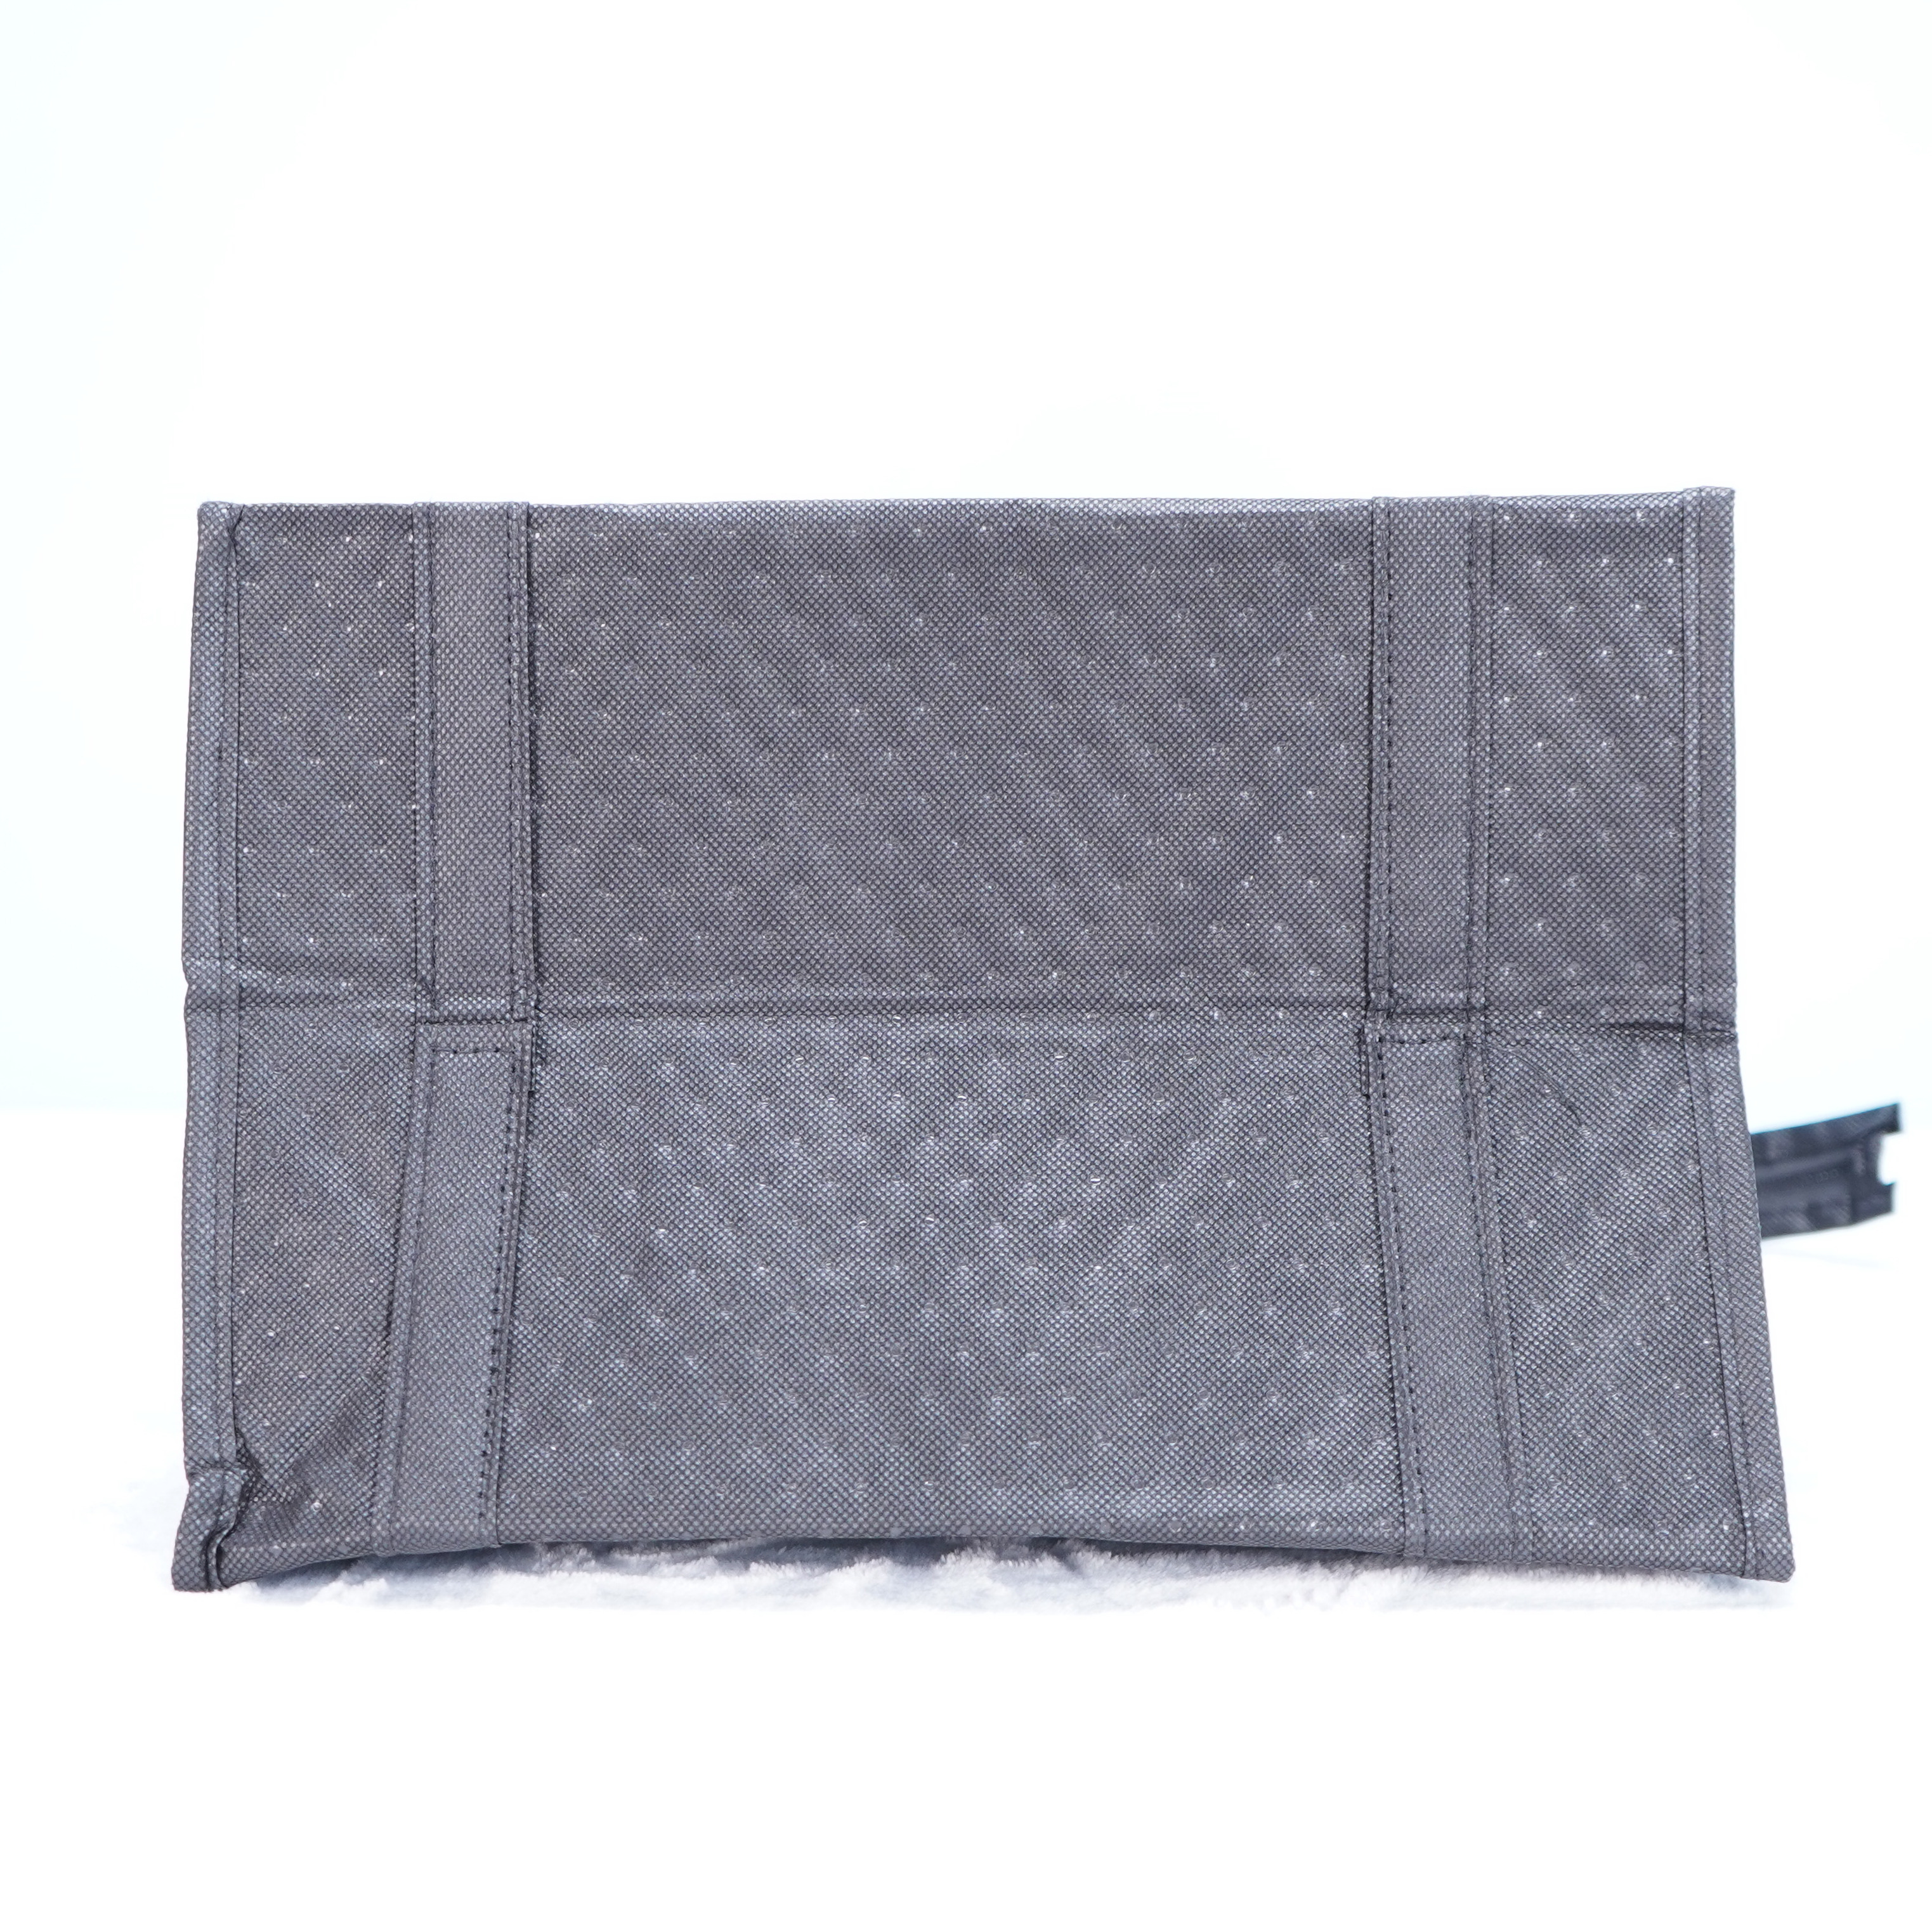 //v4-upload.goalsites.com/760/image_1652692947_Silk-printing-Heat-transfer-printing-Hand-Sewing-PP-non-woven-fabric-with-hot-stamping-2mm-foam-alumium-cooler-bag-thermal-bag-1-2-(22).JPG